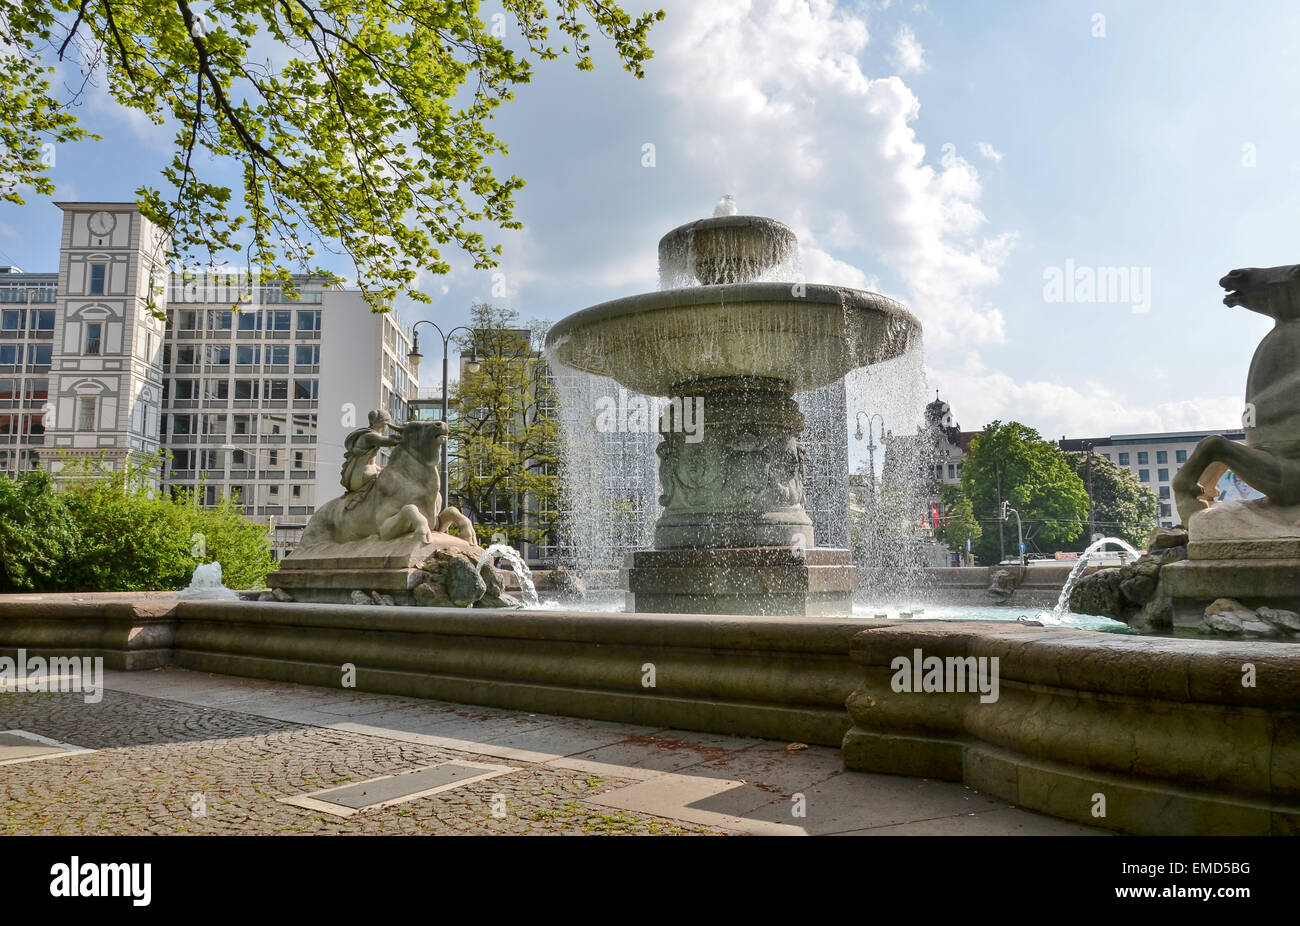 Allegory of the forces of water at the Lenbach Fountain at Munich, Maxburg in the background Stock Photo